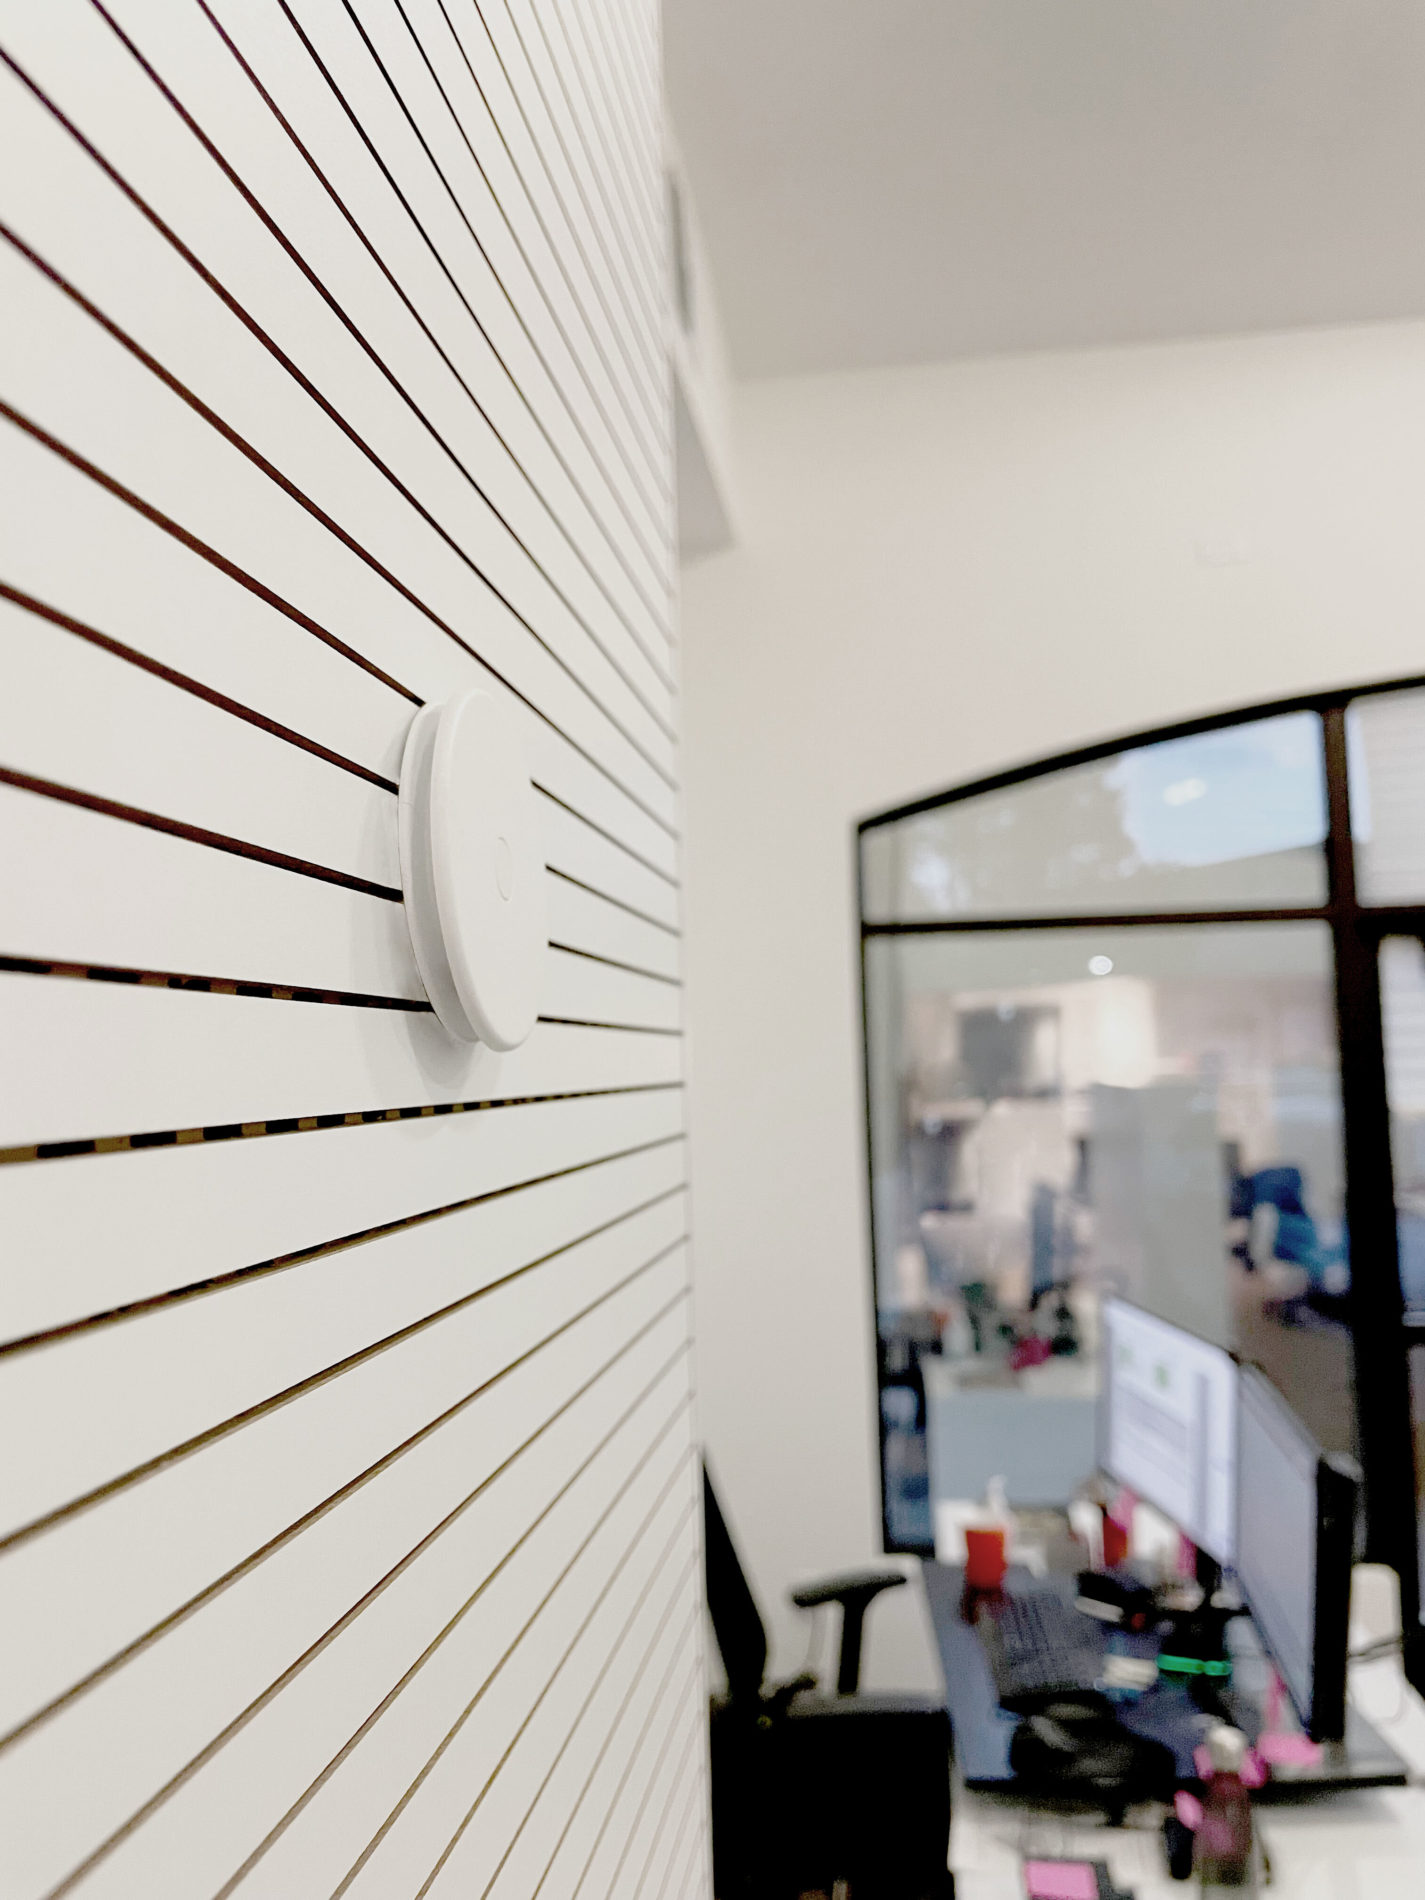 mSense sensor installed in our Soquel office.